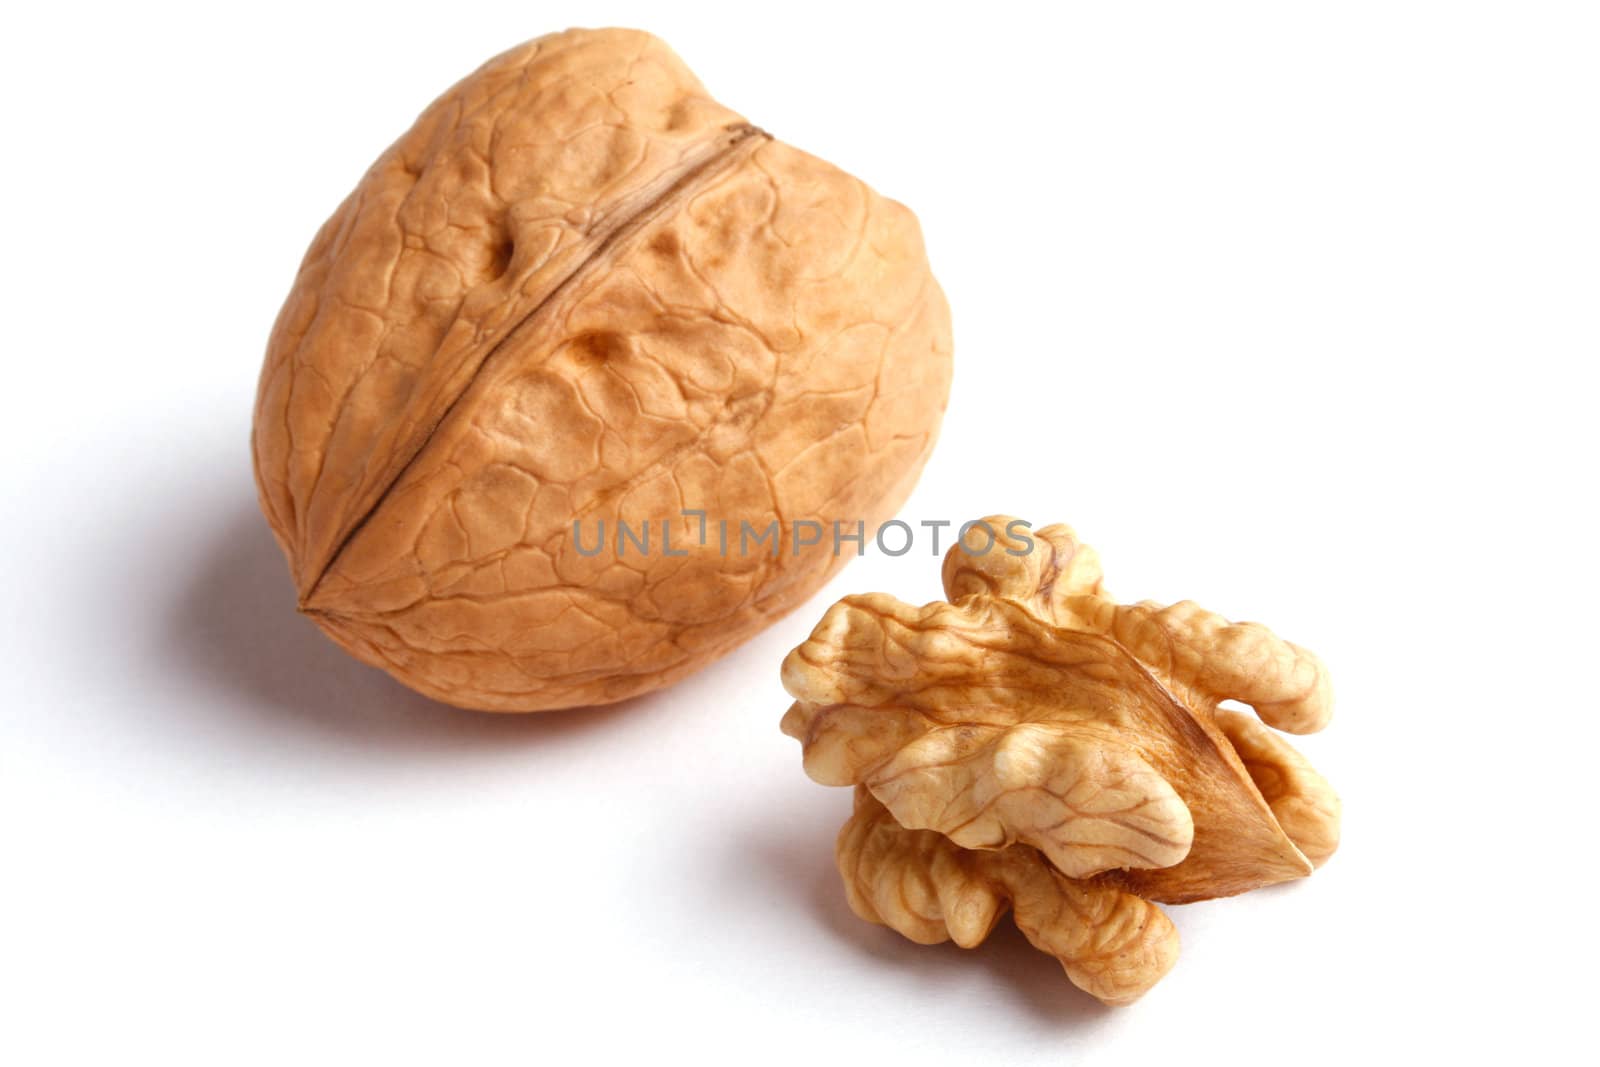 walnut with and without nutshell